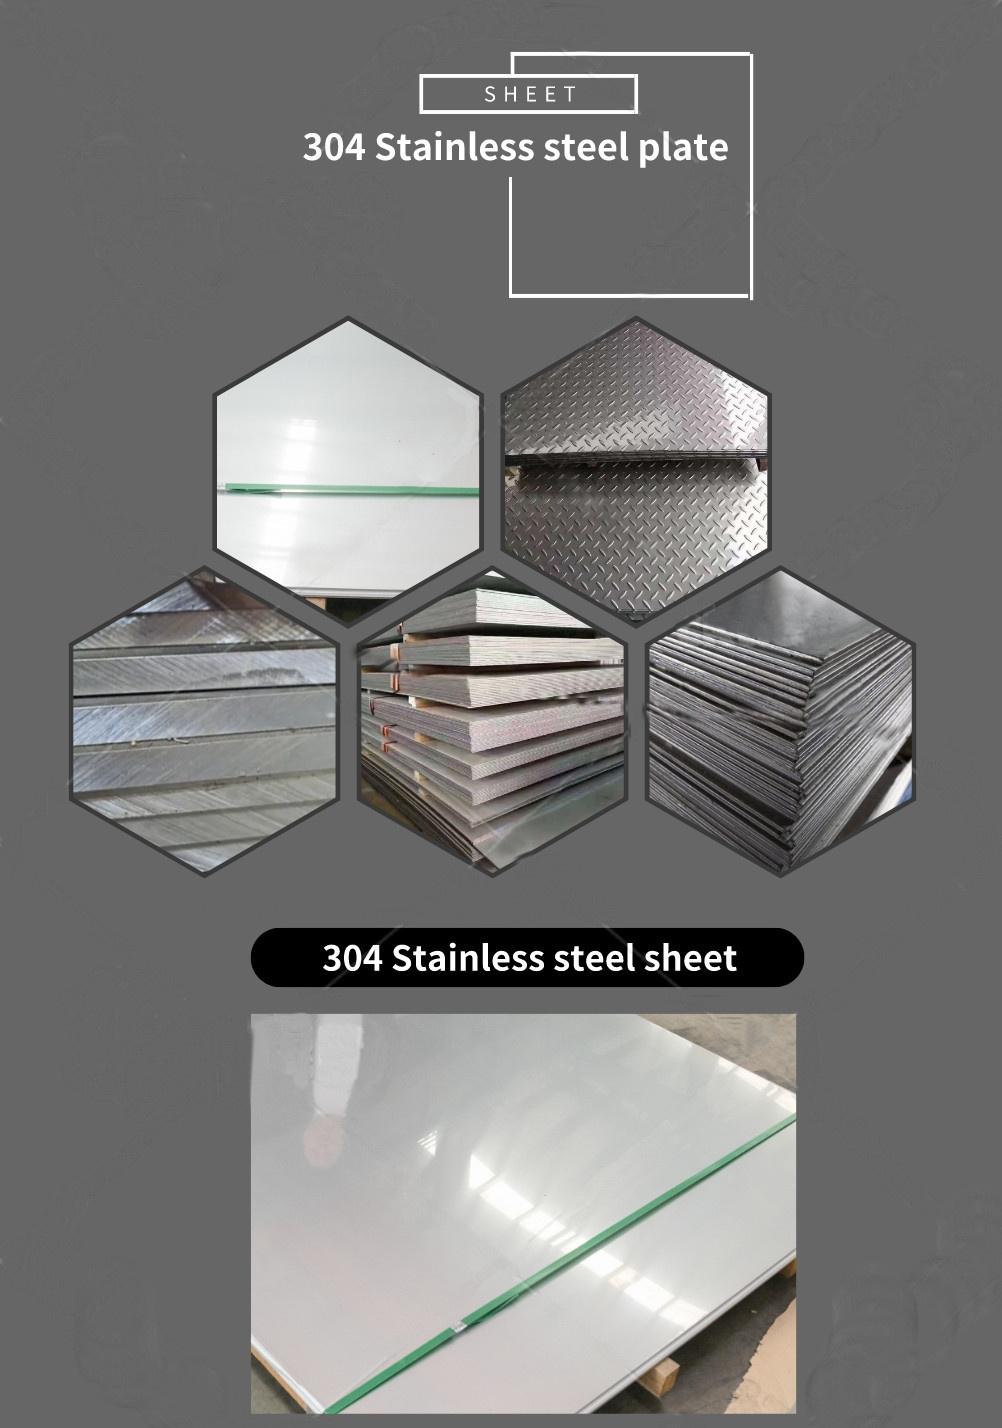 ASTM/GB/JIS 202 317 Hot Rolled Stainless Steel Plate for Boat Board